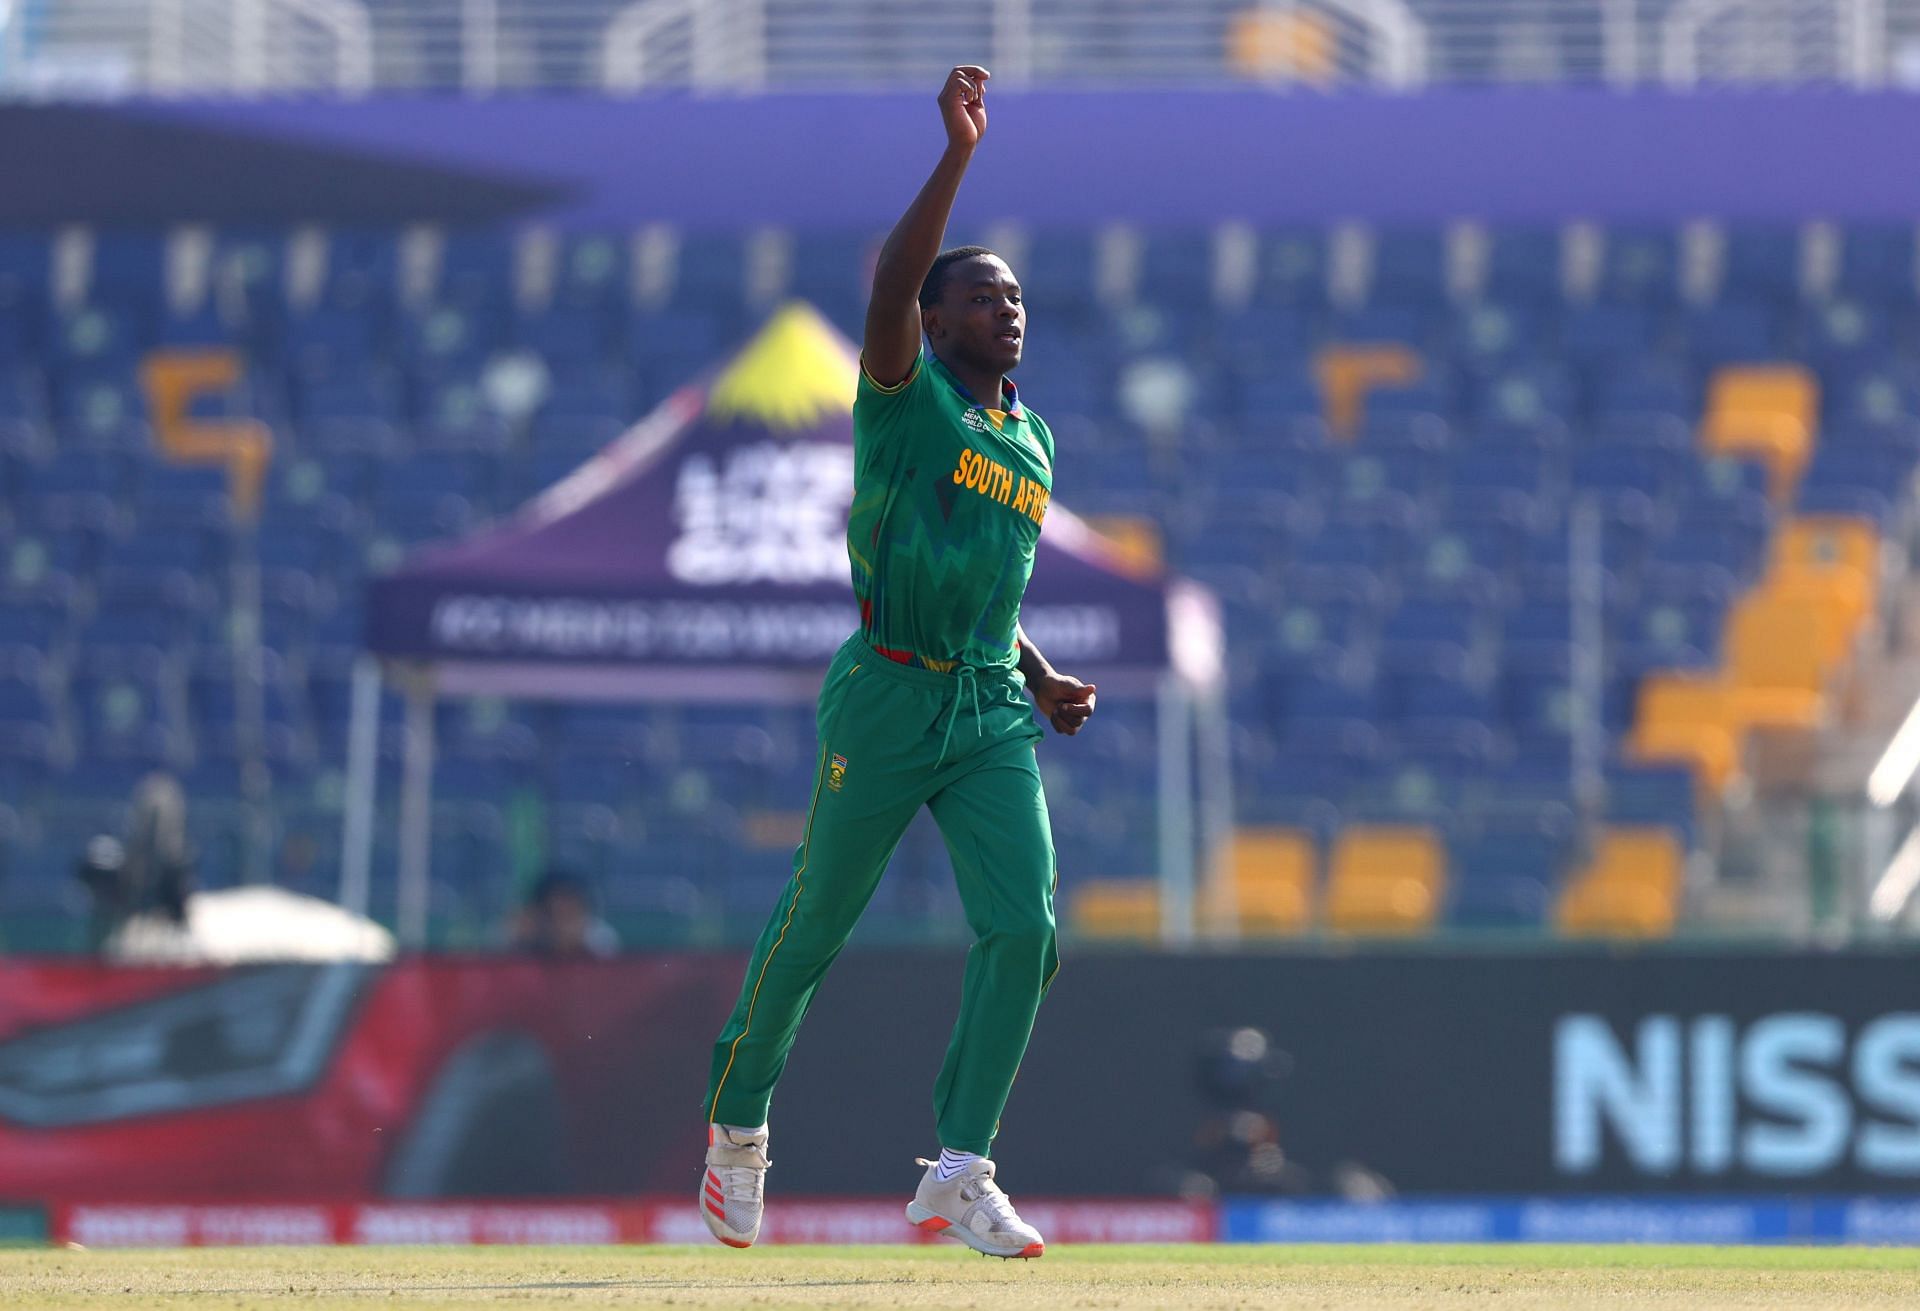 Kagiso Rabada will look to lead the attack for South Africa against the Tigers.